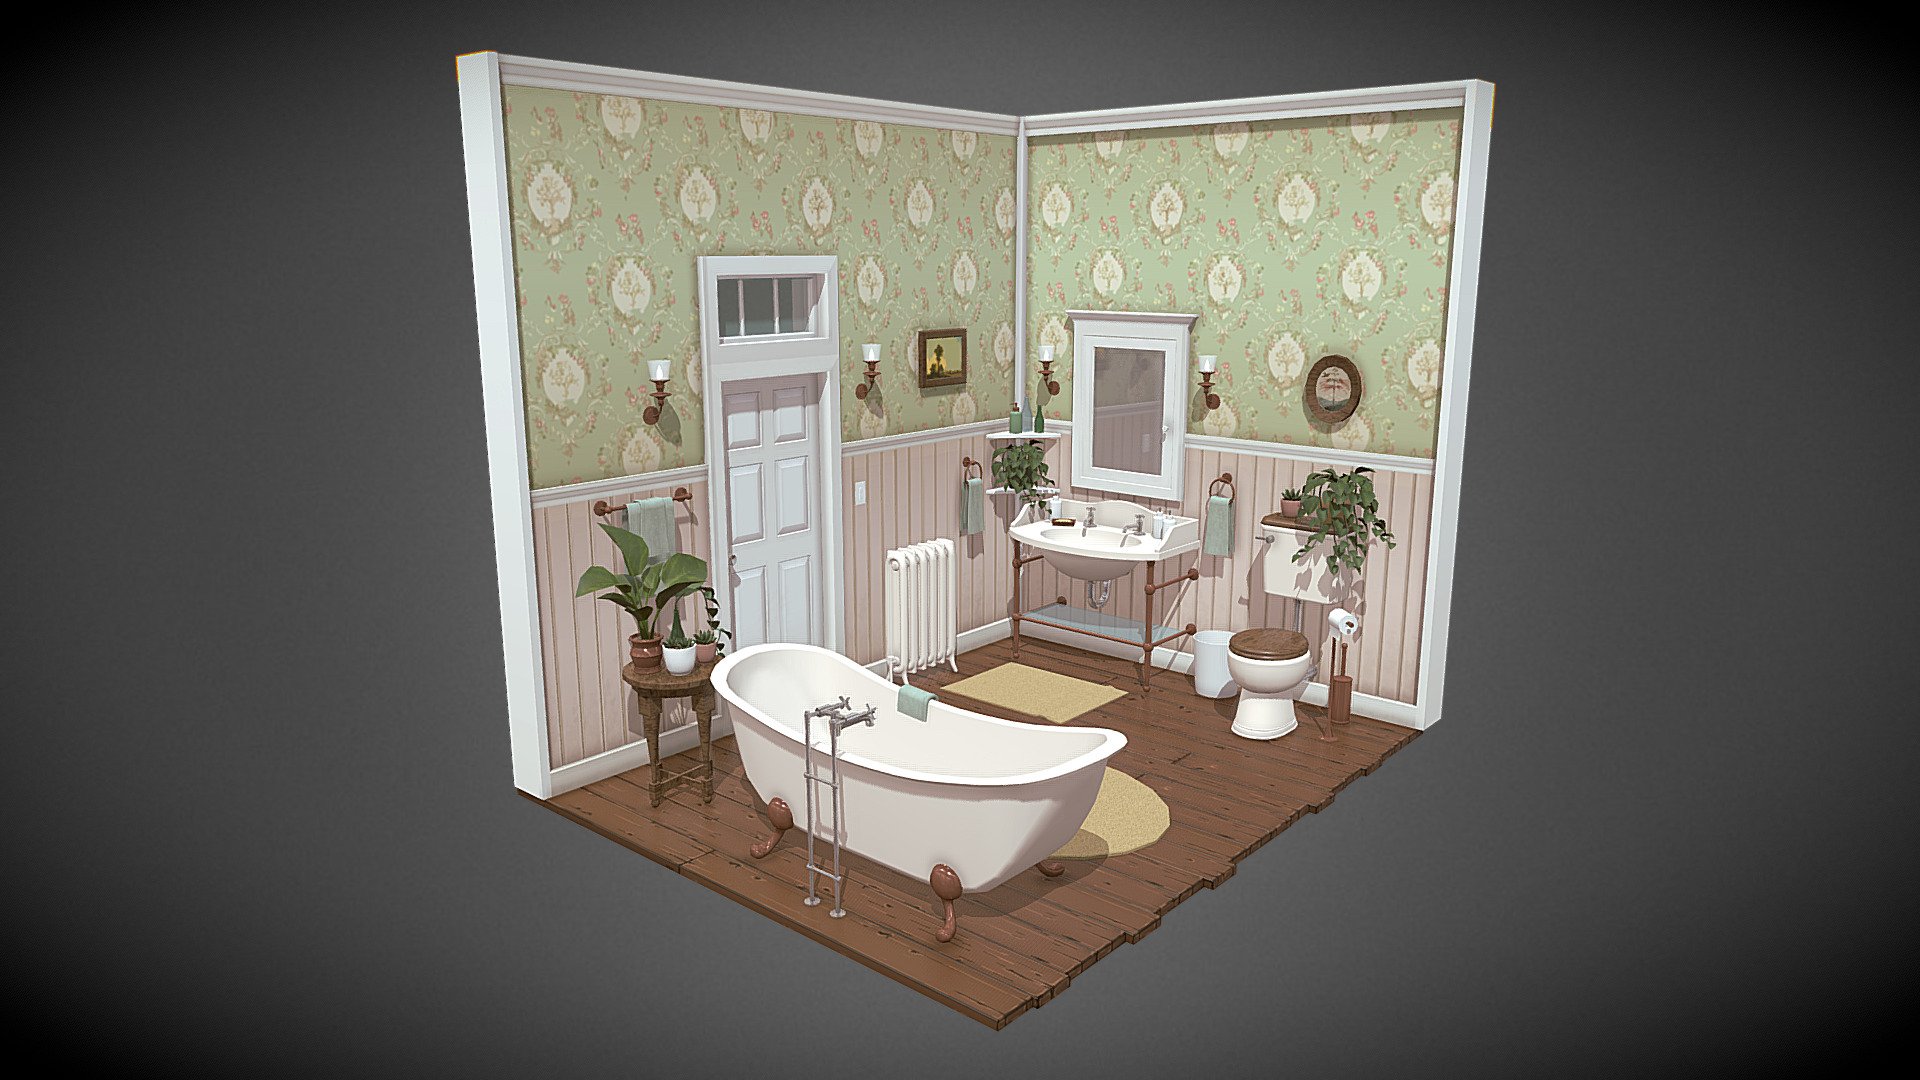 A Victorian style bathroom that I created as an experiment in low poly  modeling and stylized textures, based on my own concept. Part of a larger Victorian house that I hope to post when I get the time! Created in Maya and textured in PS. Had a lot of fun making this. :D - Victorian Bathroom Interior - 3D model by Natalie Crabtree (@natcrab) 3d model